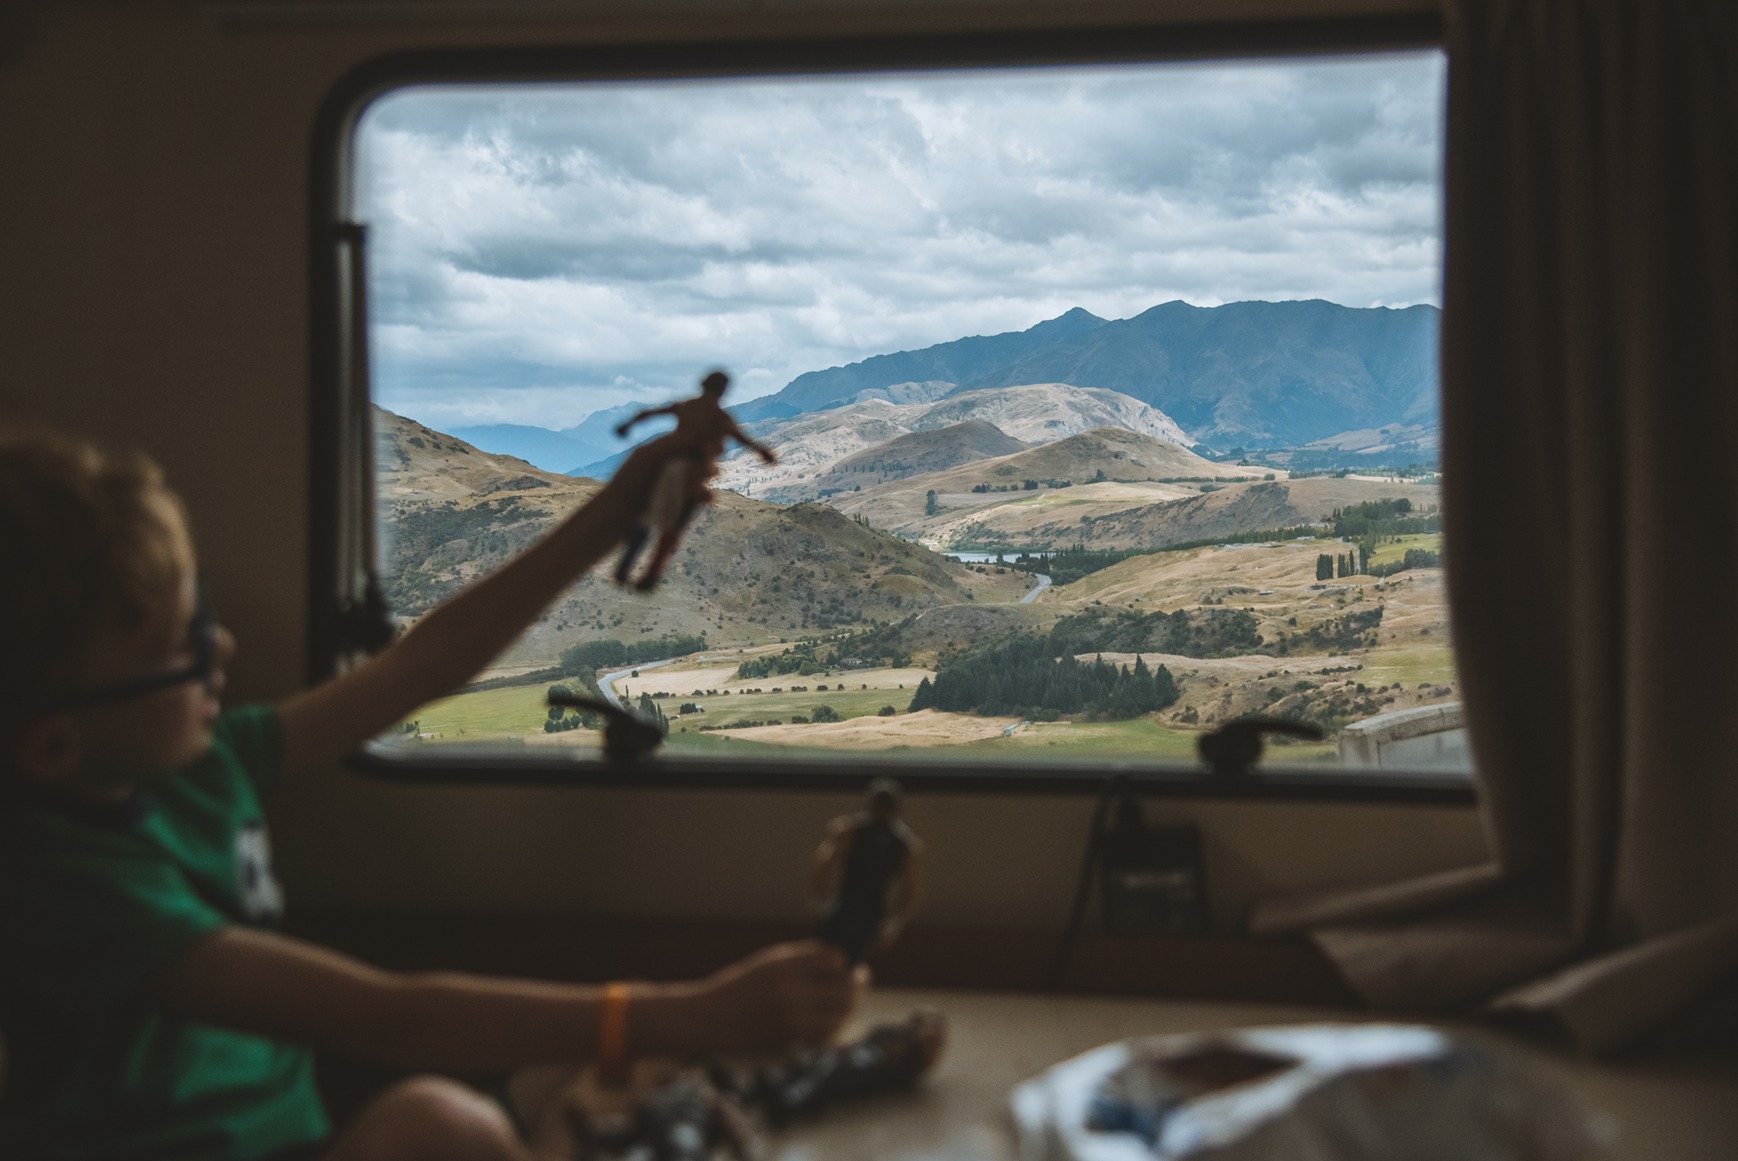 Kid playing with his toy while travelling in a motorhome